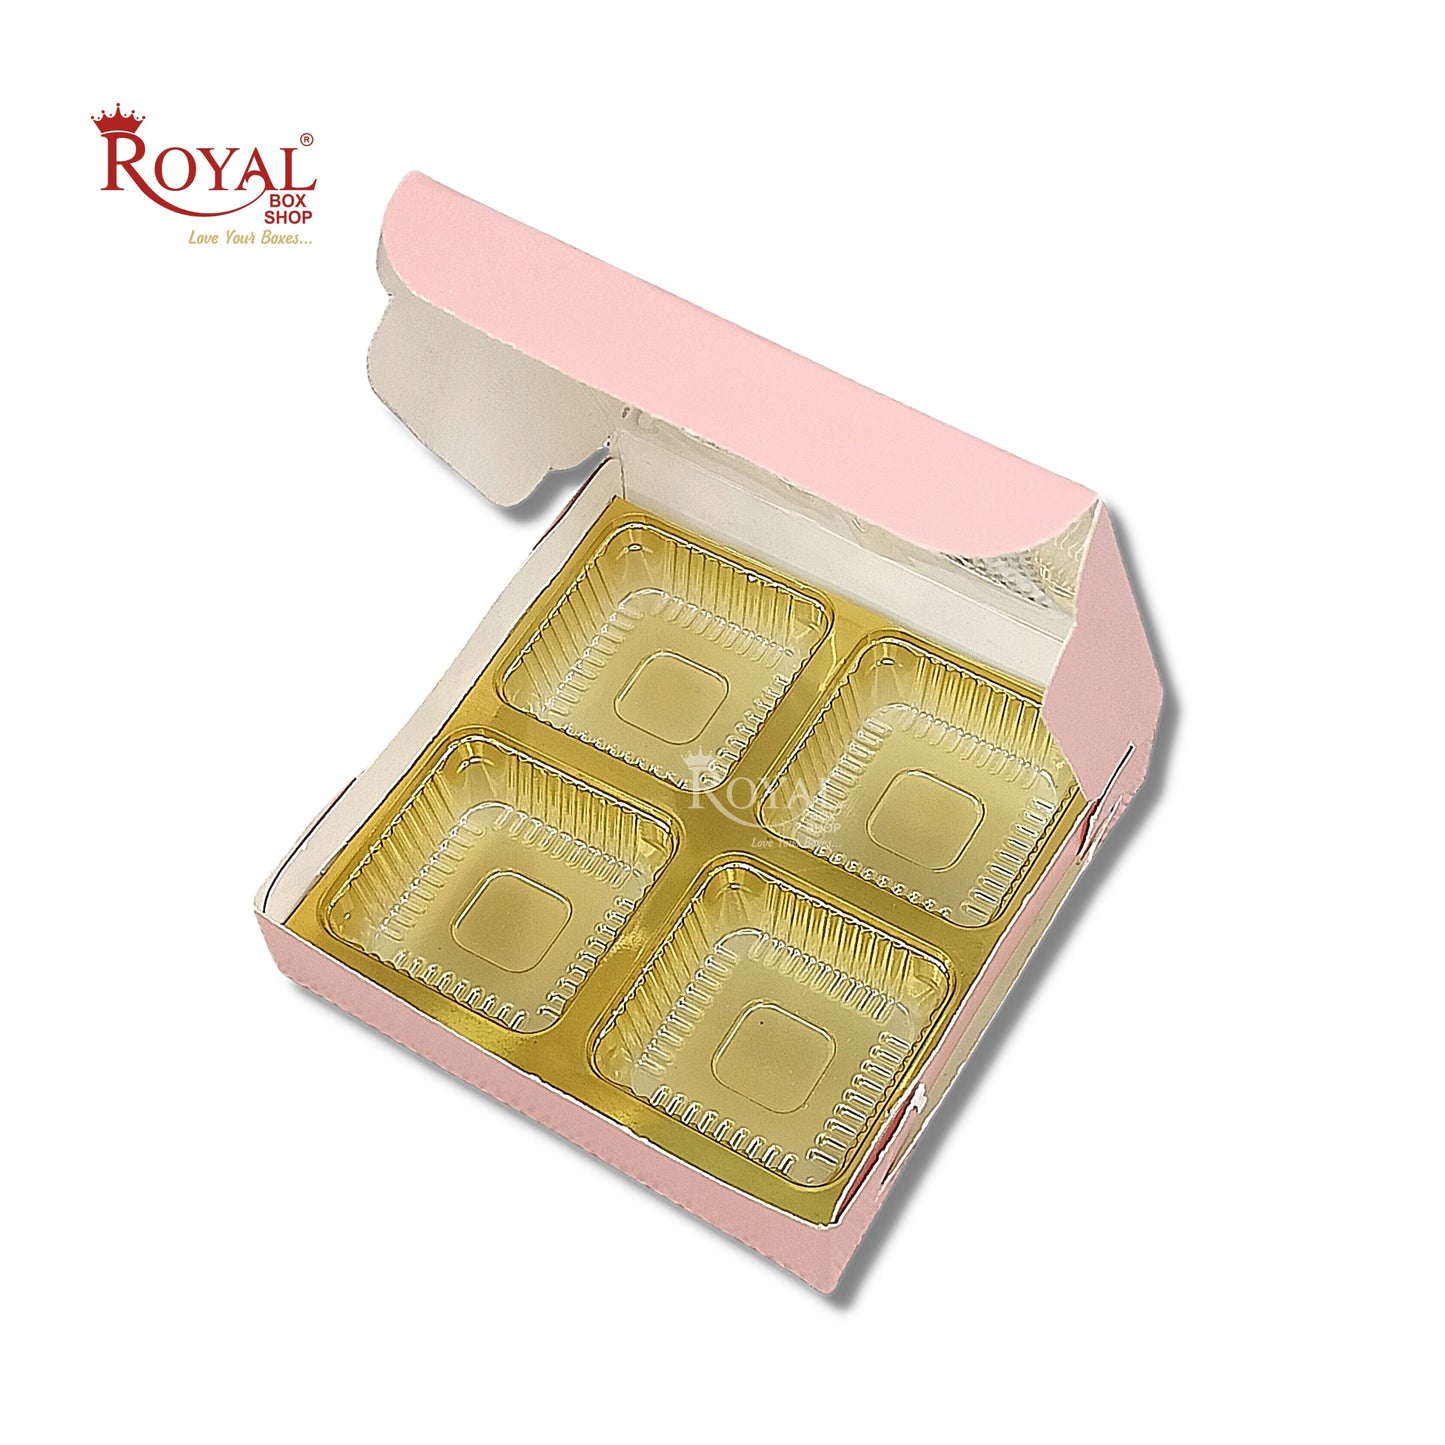 4 Cavity Chocolate Boxes with Window I 3.75 x 3.75 x 1 inches I Baby Pink Royal Box Shop